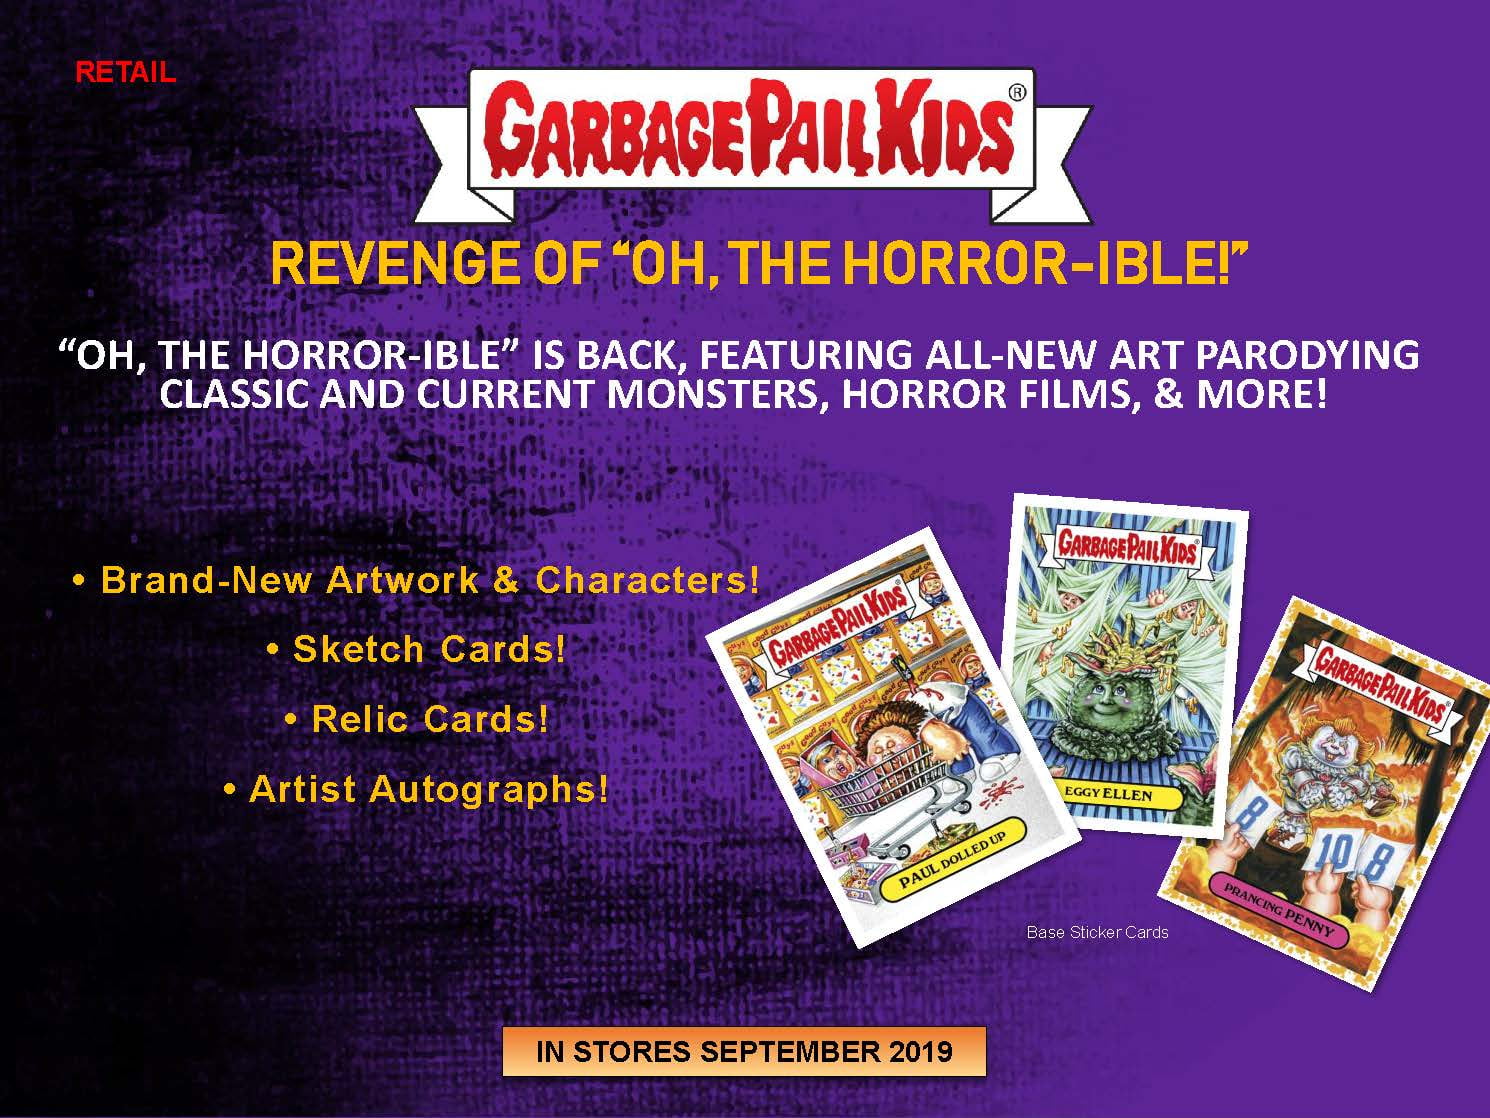 #SF-3b Fly the Cooper 2019 Garbage Pail Kids Revenge of Oh The Horror-ible 